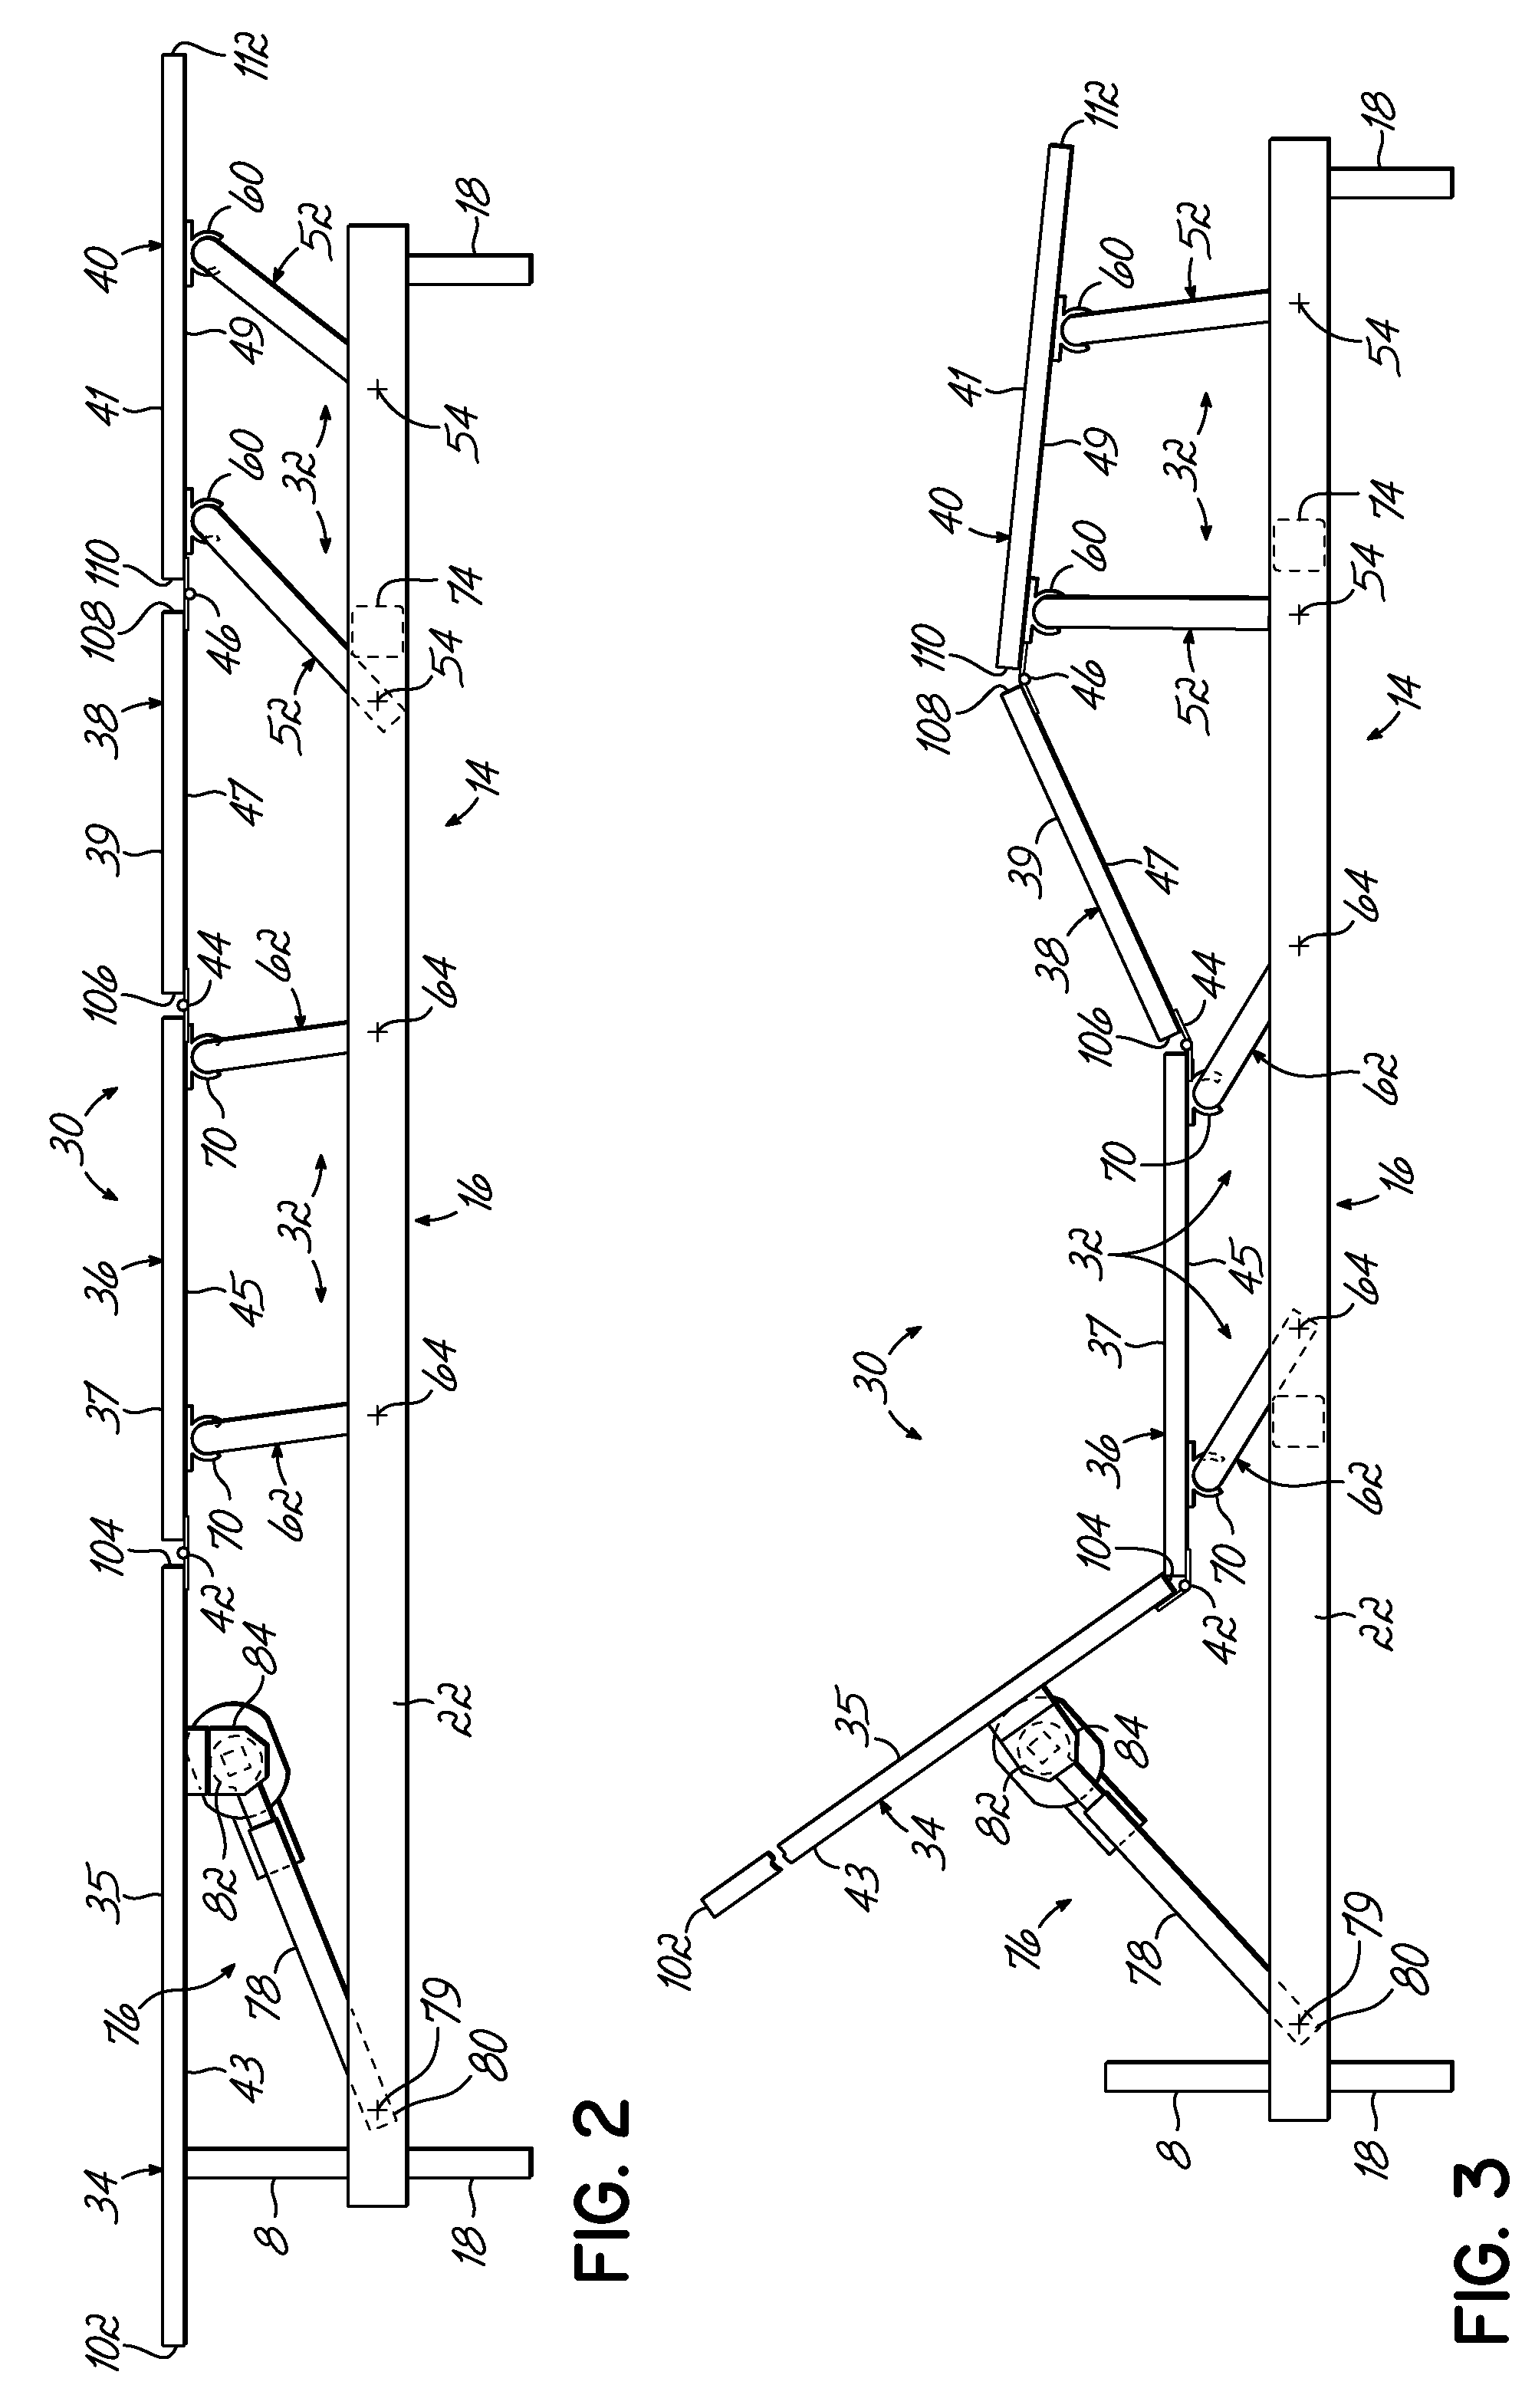 Systems and Methods To Adjust An Adjustable Bed